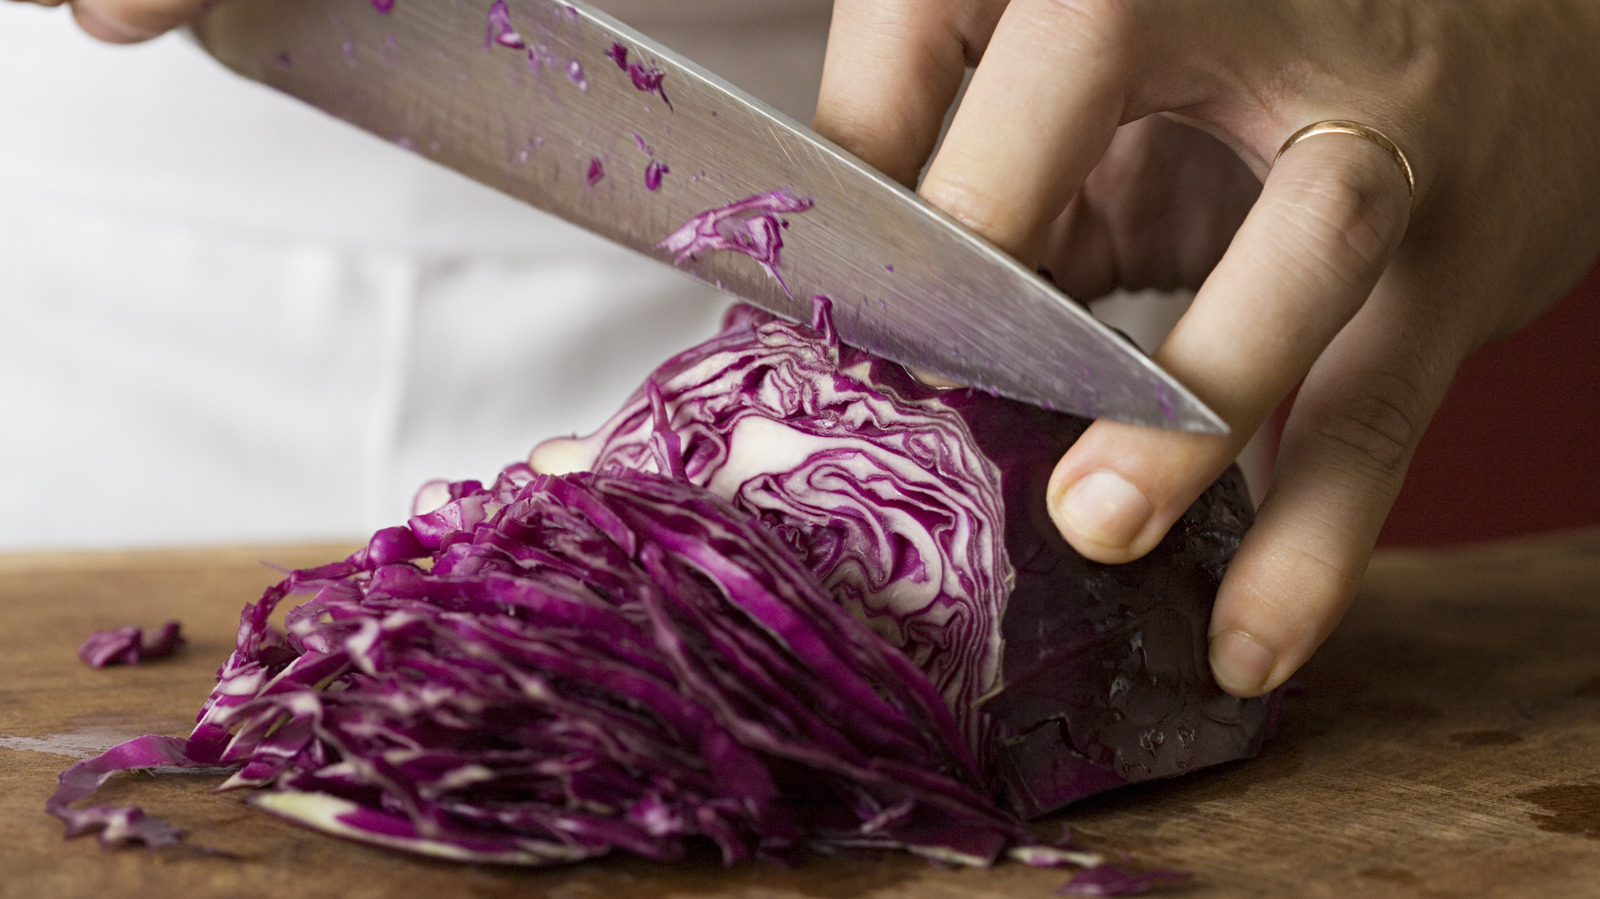 Natural Blue Food Coloring with Red Cabbage {VIDEO}